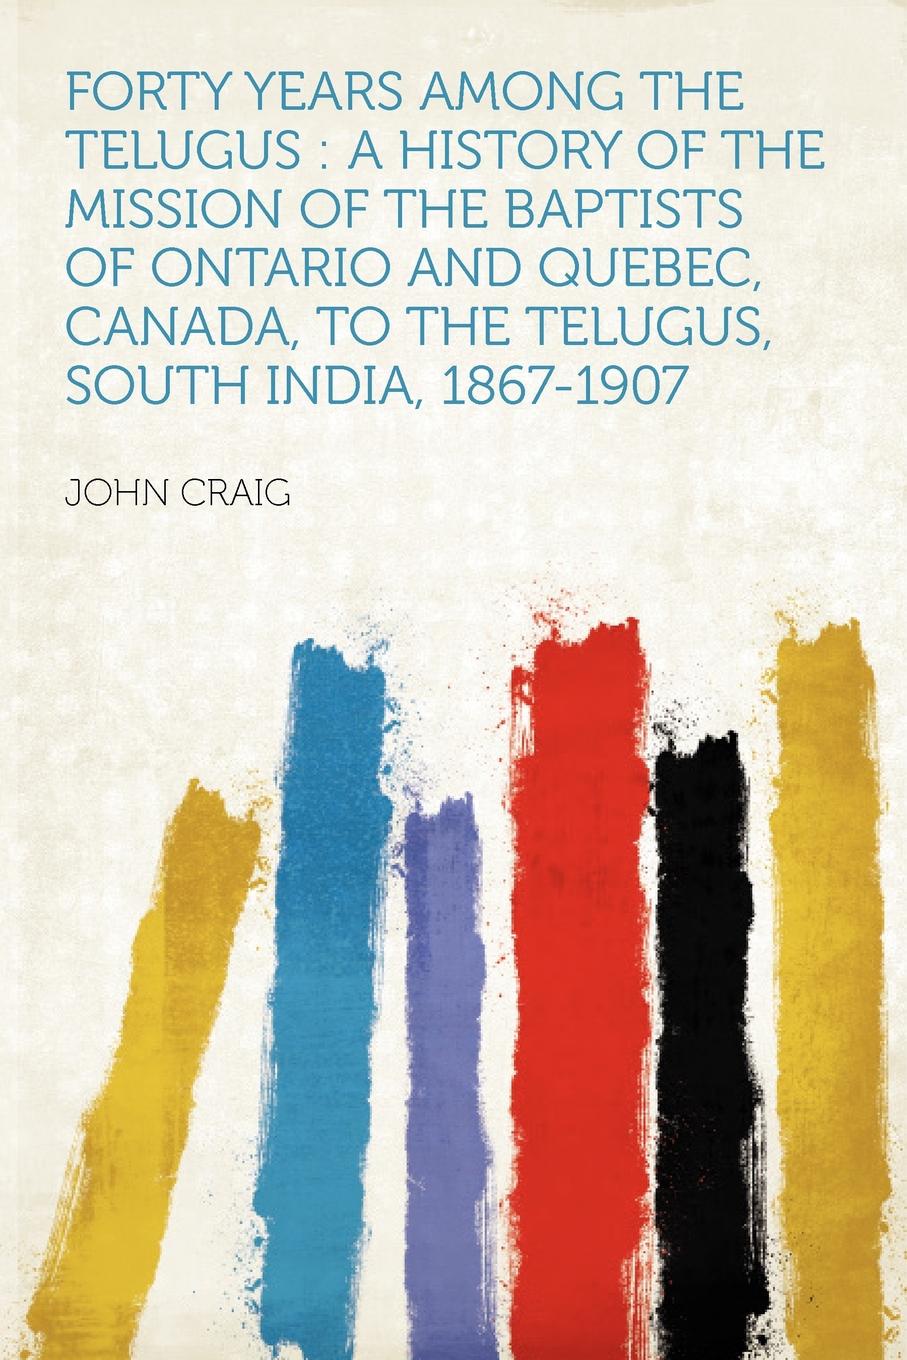 Forty Years Among the Telugus. a History of the Mission of the Baptists of Ontario and Quebec, Canada, to the Telugus, South India, 1867-1907